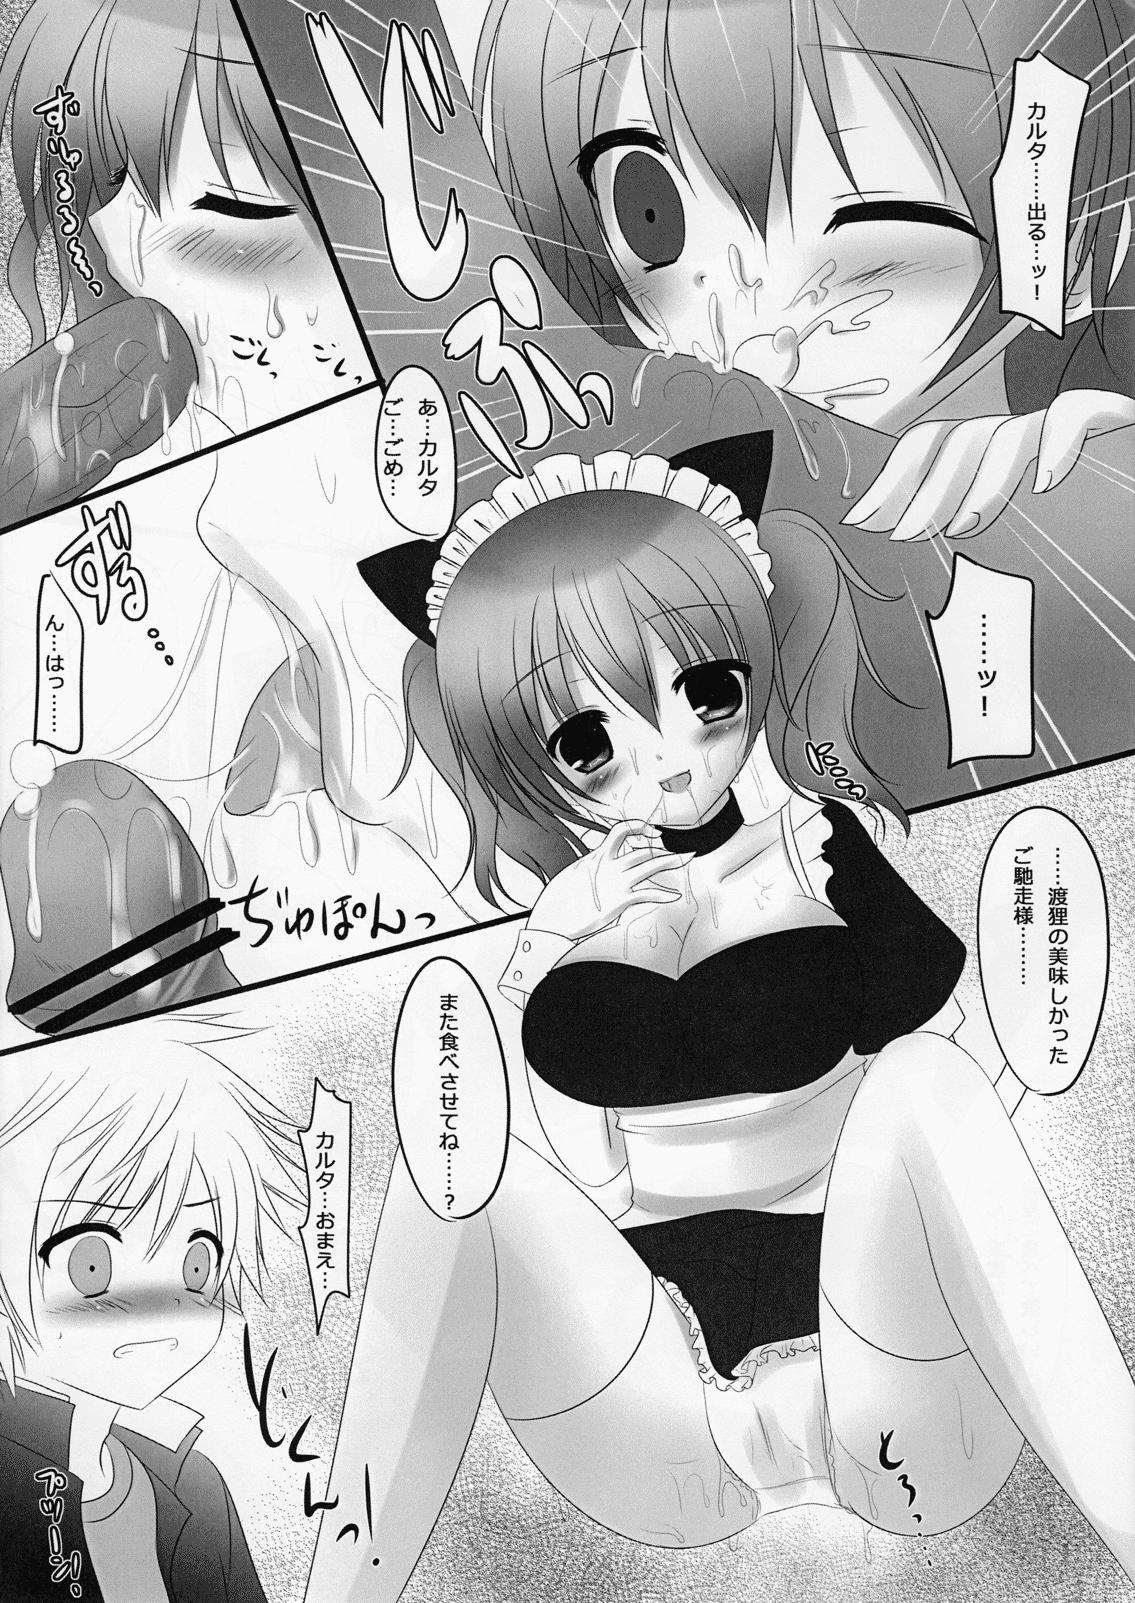 Negro Sweets Paradise - Inu x boku ss Spying - Page 6